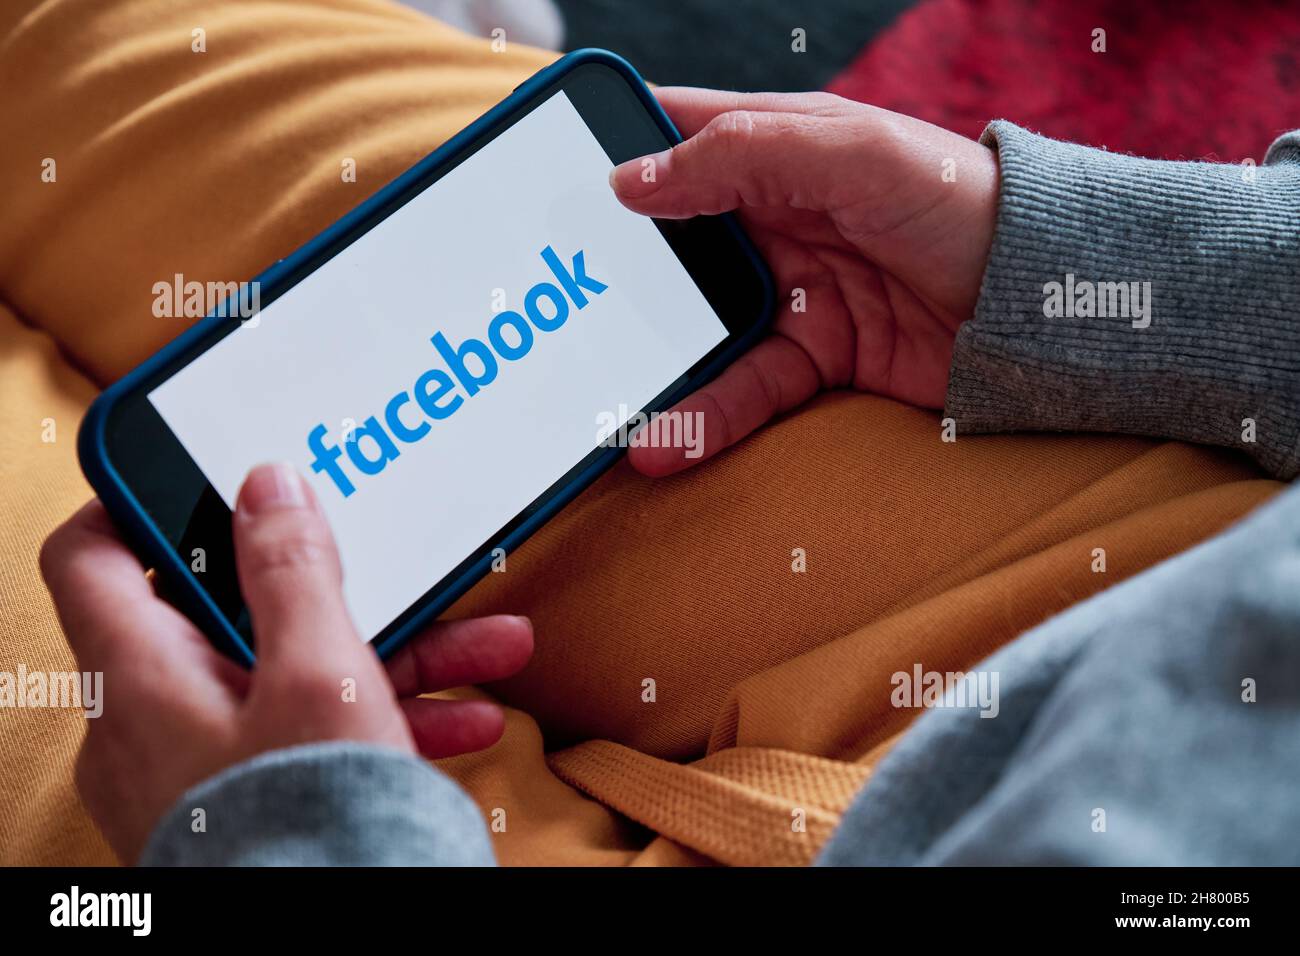 Barcelona, Spain - March 22 2021 : a woman holding an iPhone 12 pro opens Facebook app Stock Photo